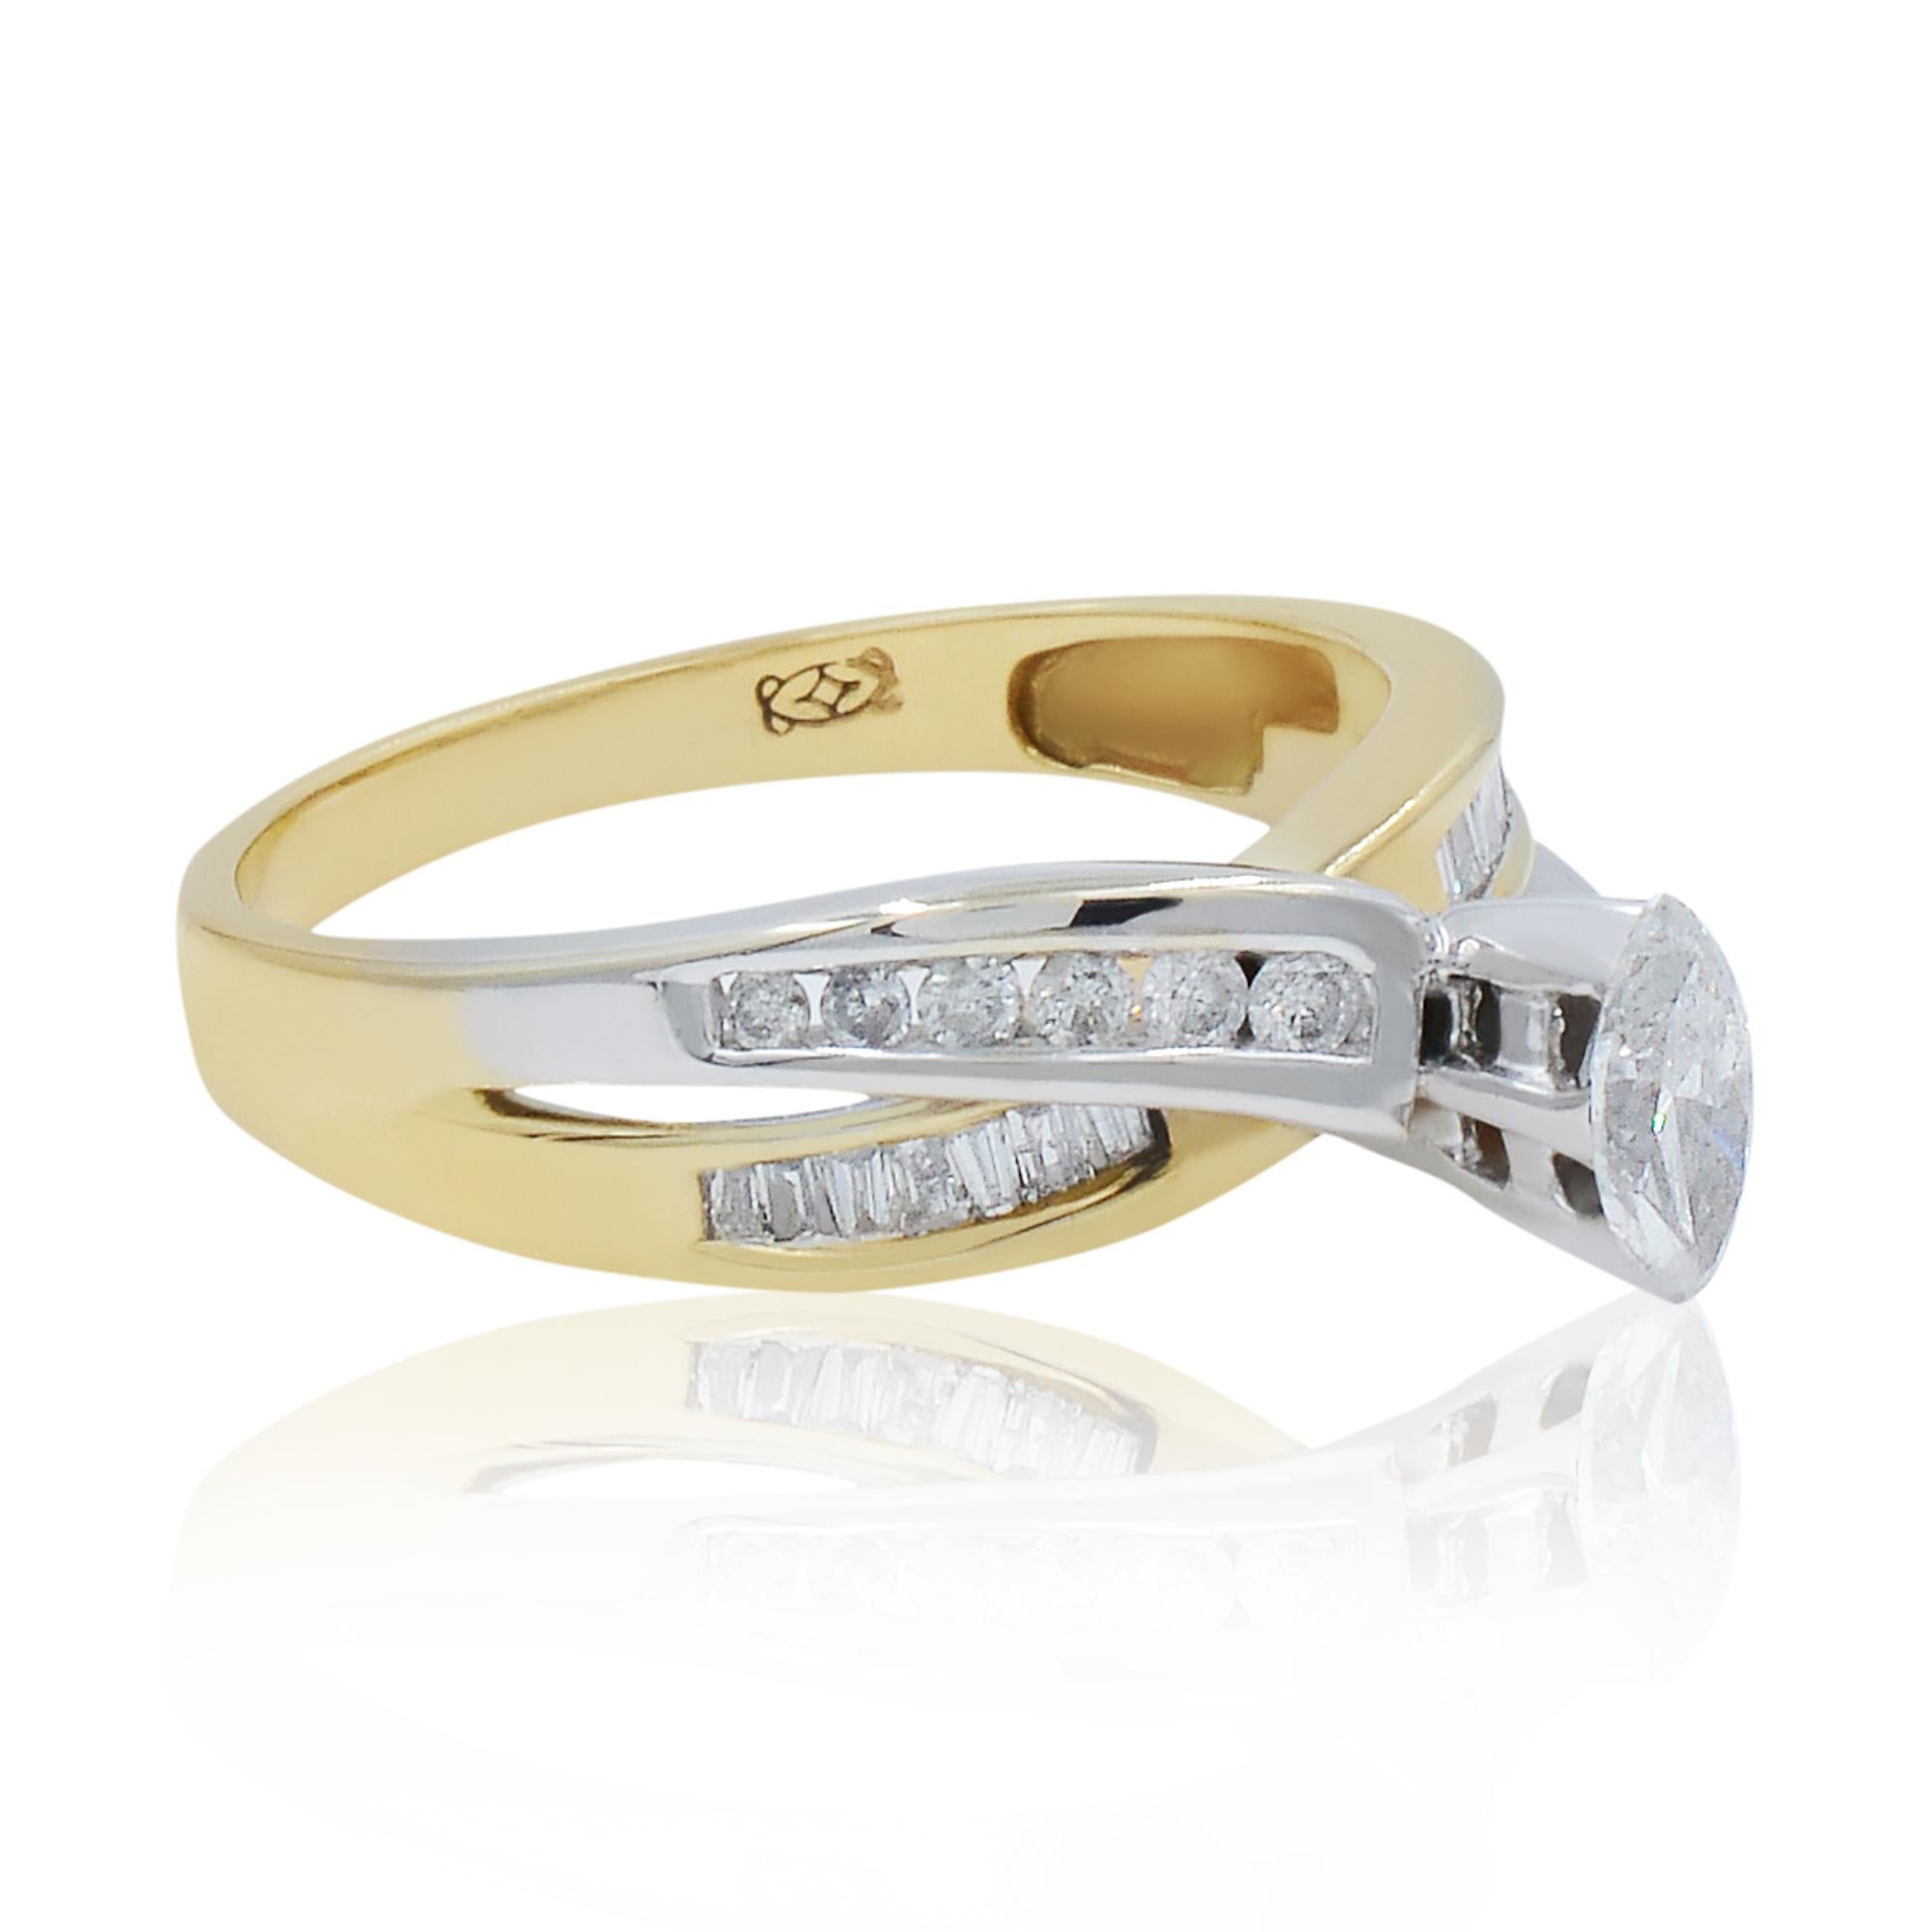 Beautiful two piece set: engagement ring and wedding band for the price of one. This beautiful ring features a marquise center diamond accented with a row of round cut diamonds in white gold and a row of baguette cut diamonds in yellow gold. The